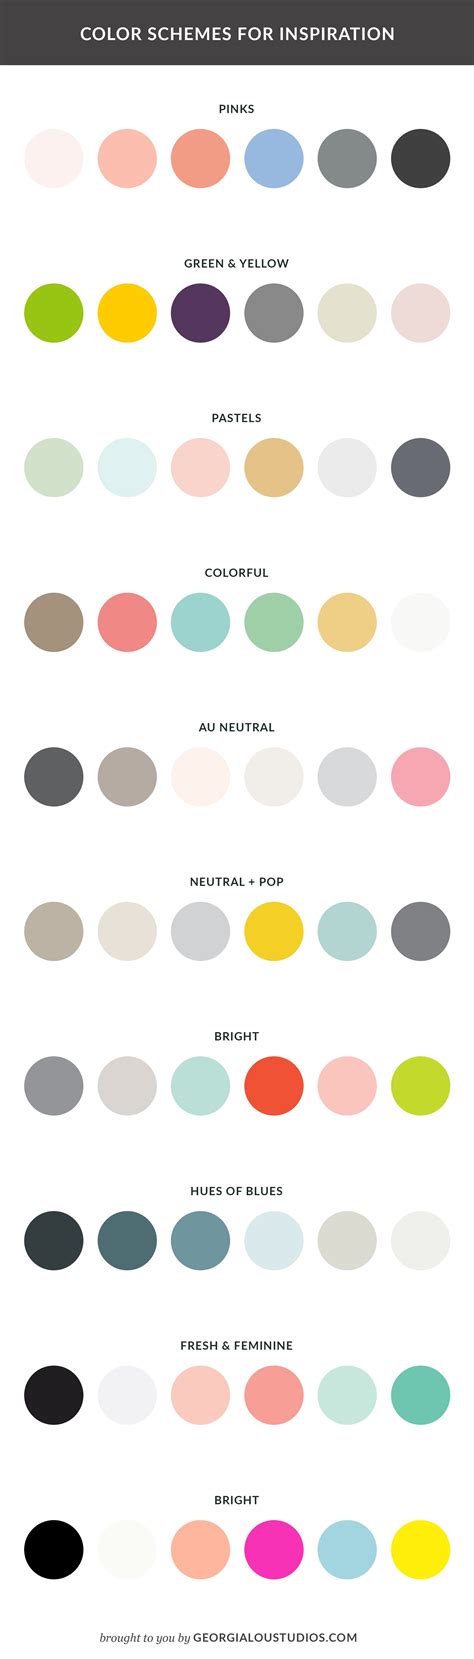 How to Pick a Color Palette for Your Blog | Warm color schemes, Color schemes, Bedroom color schemes